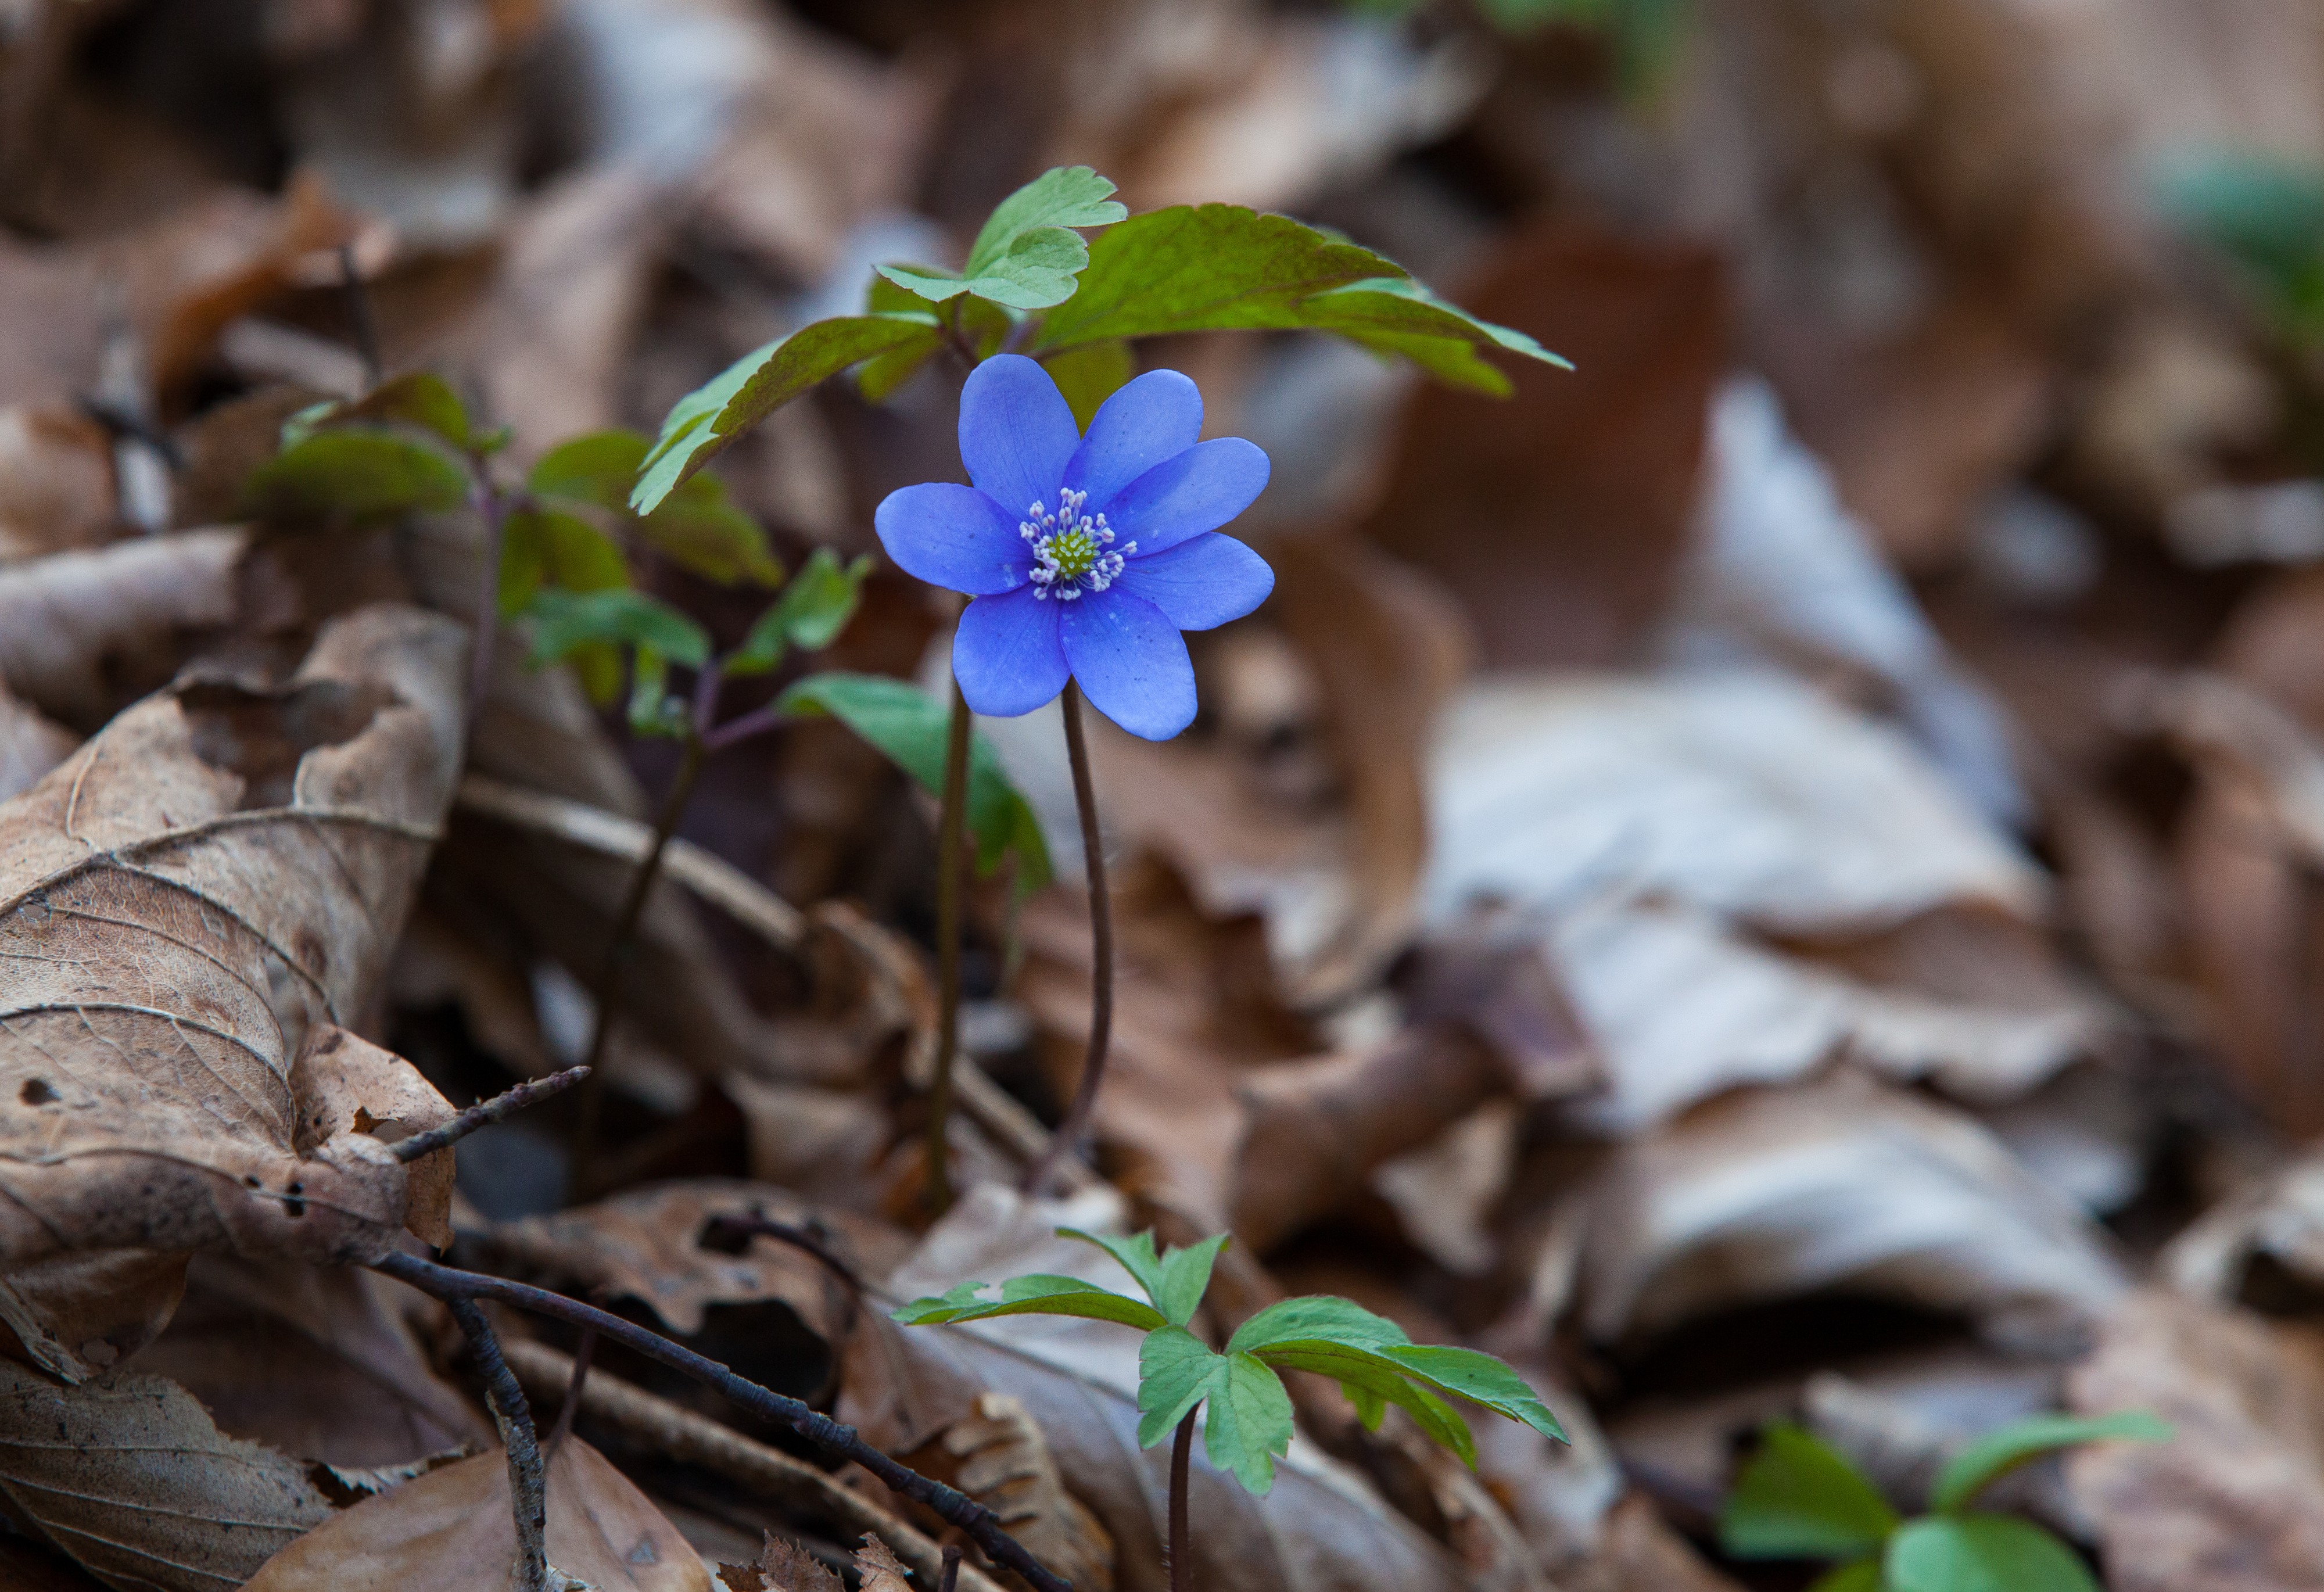 a blue flower in a forest in Lviv region of Ukraine in March 2014